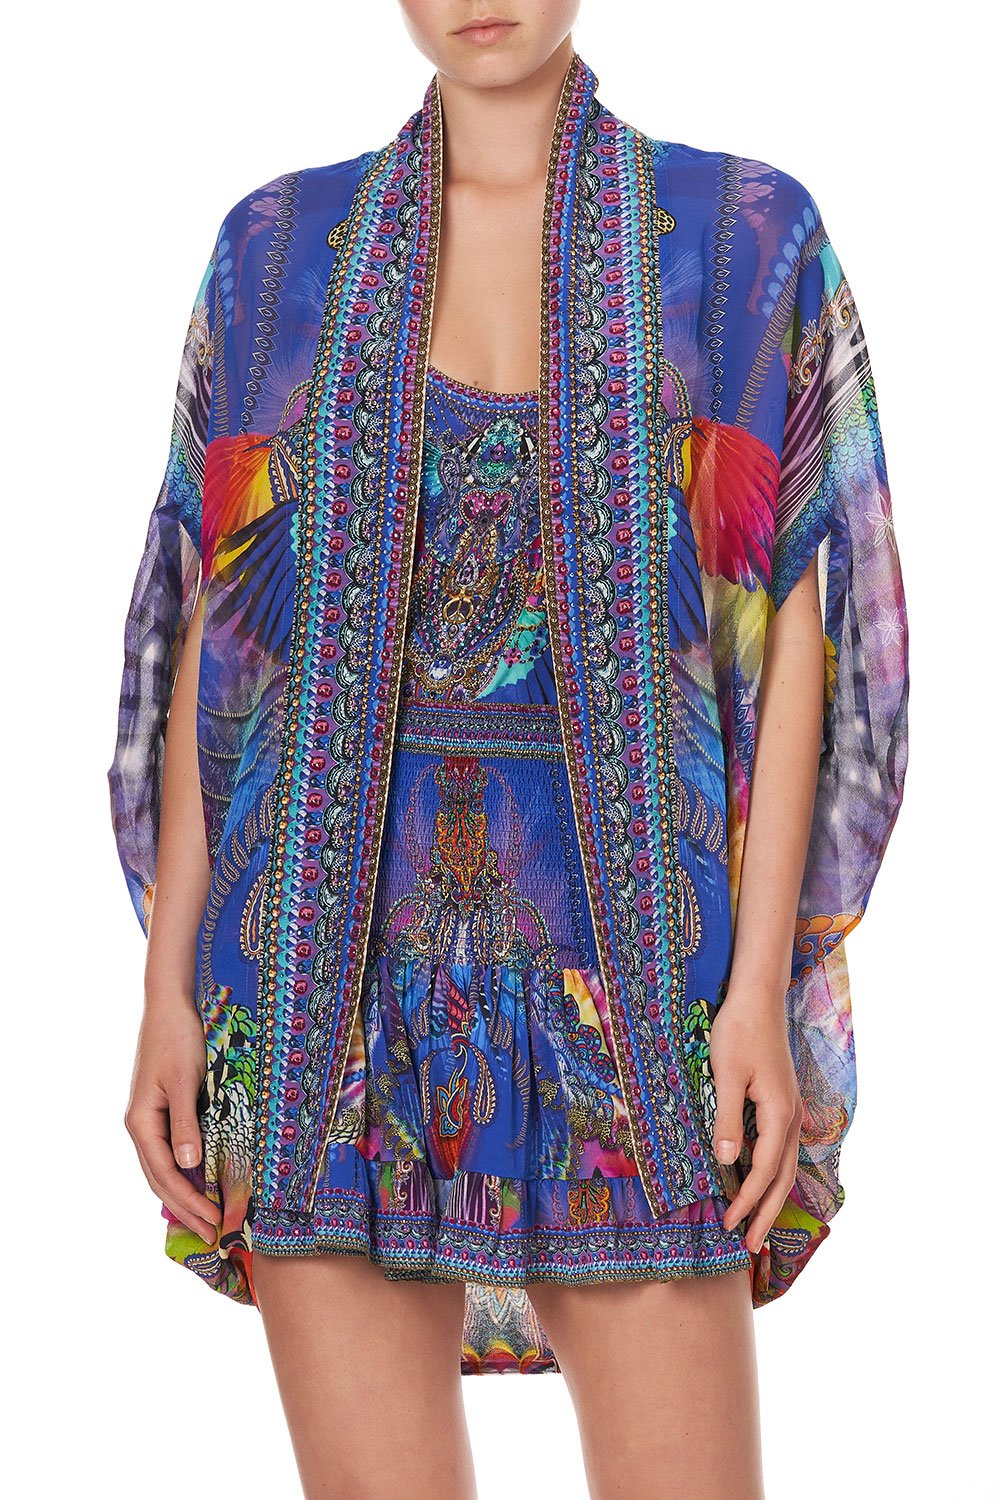 OPEN FRONT CARDI CAPE PSYCHEDELICA